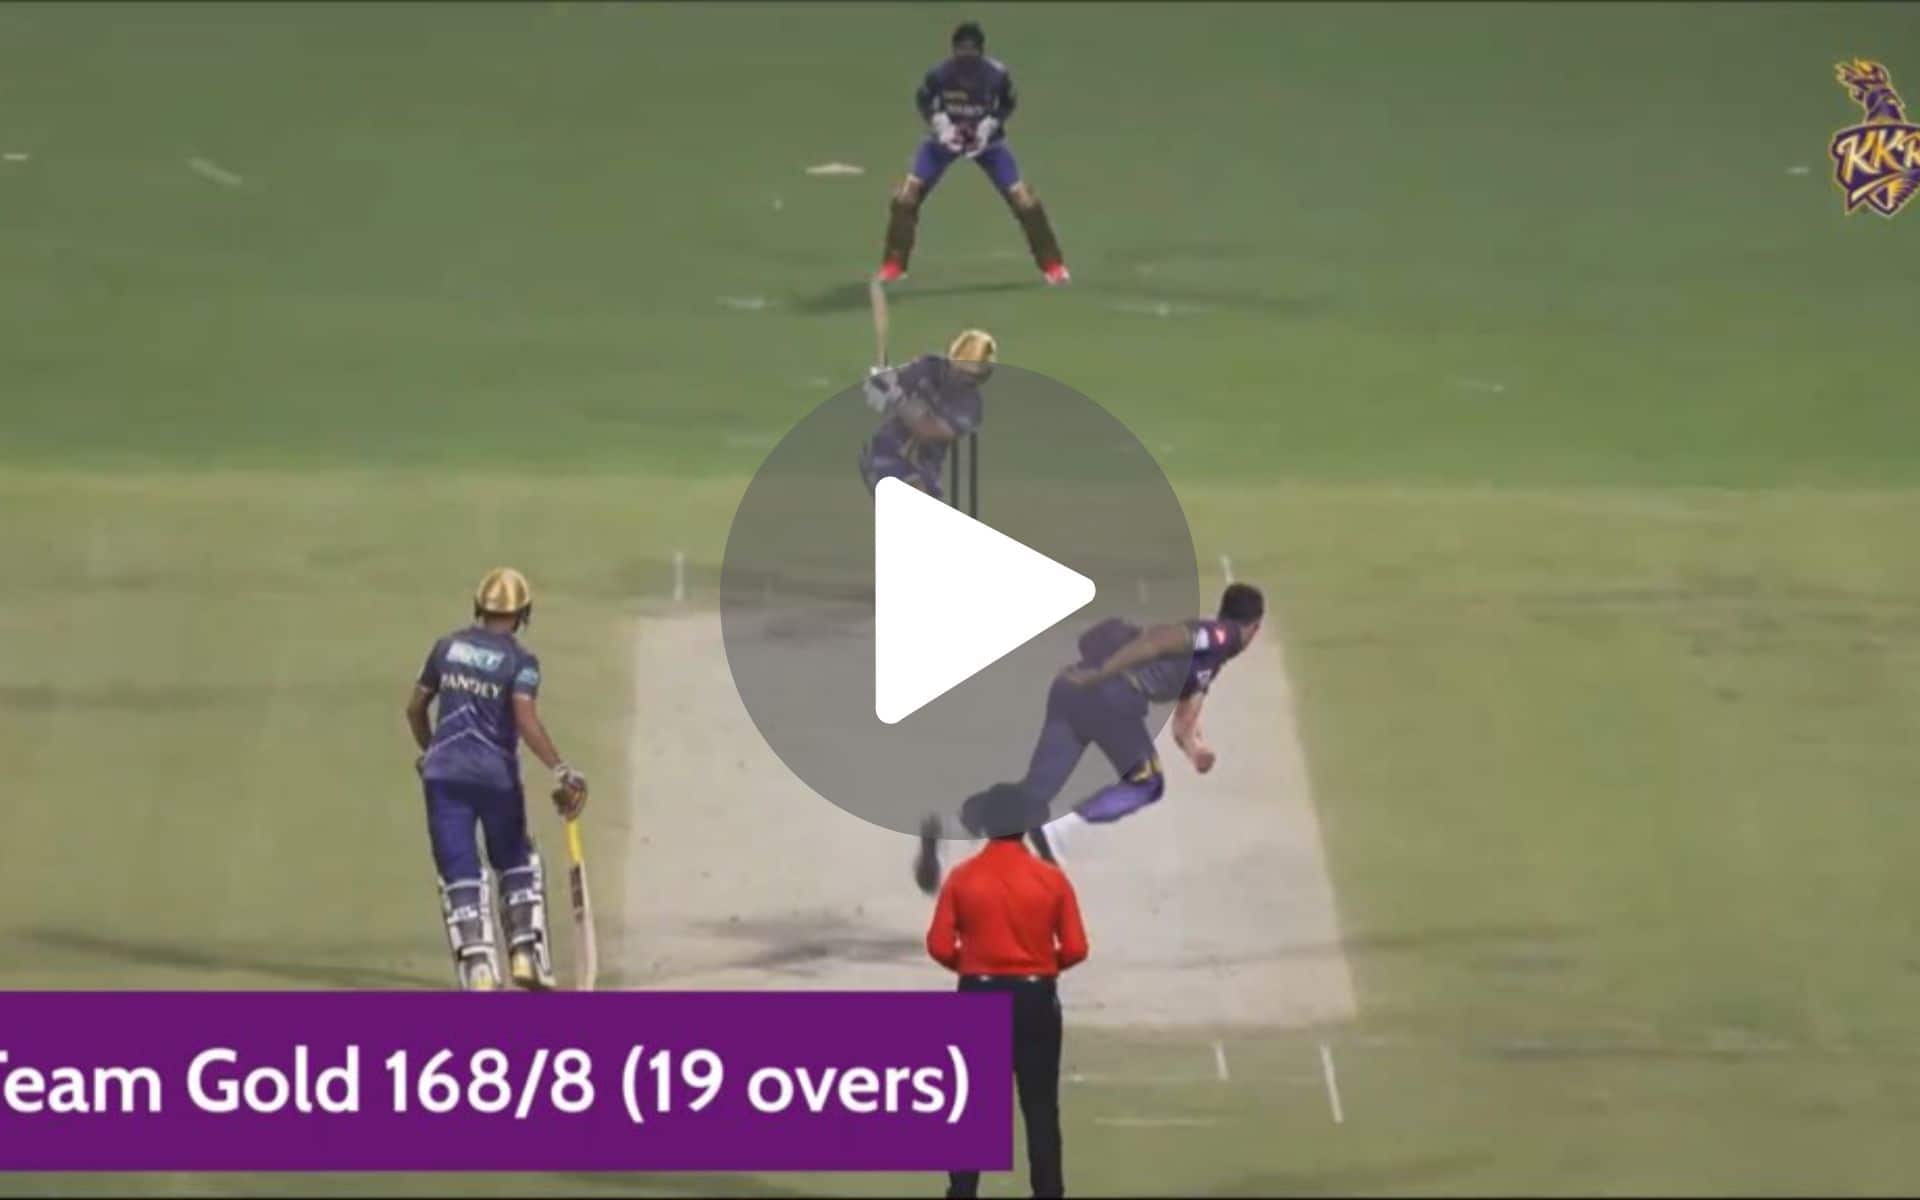 [Watch] Rinku Singh Smashes 24.75 Crores Man Mitchell Starc For A Gigantic Six